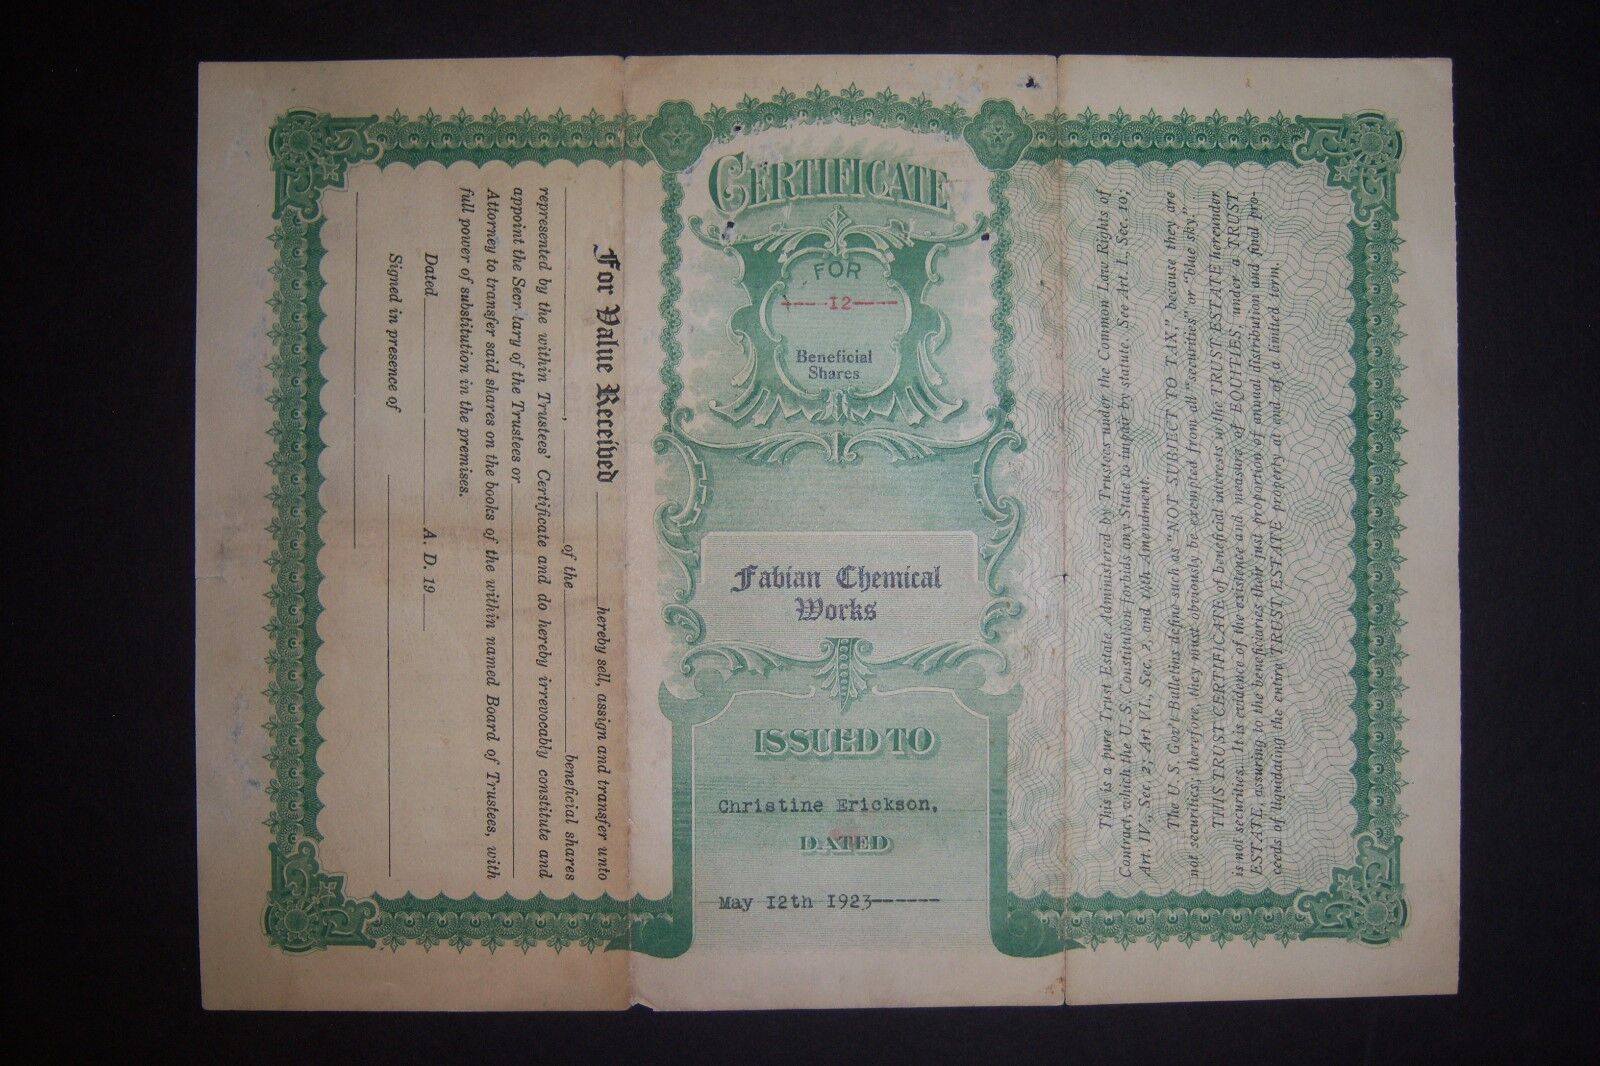 Vintage Certificate for Beneficial Shares FABIAN CHEMICAL WORKS, 1923, stock